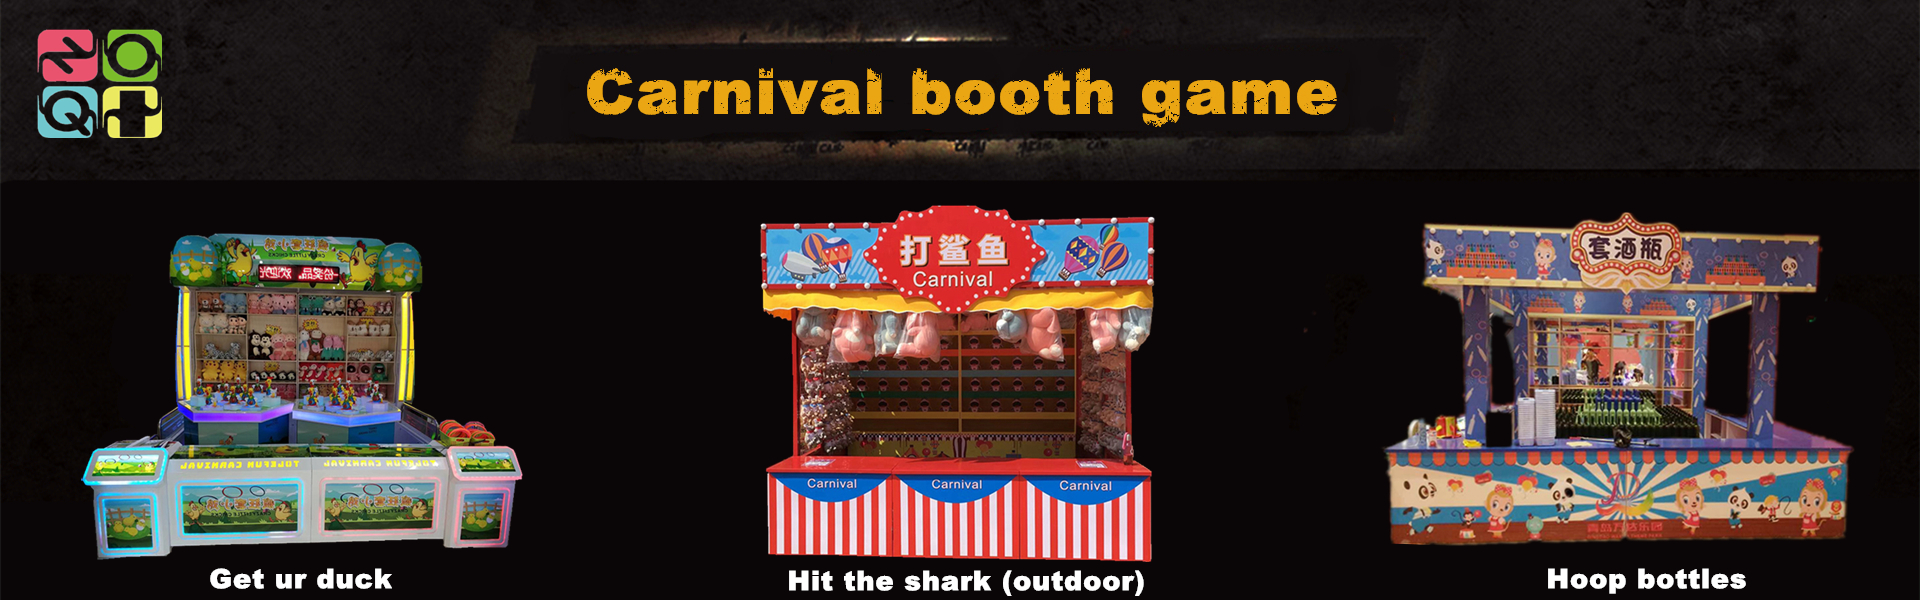 carnival booth game